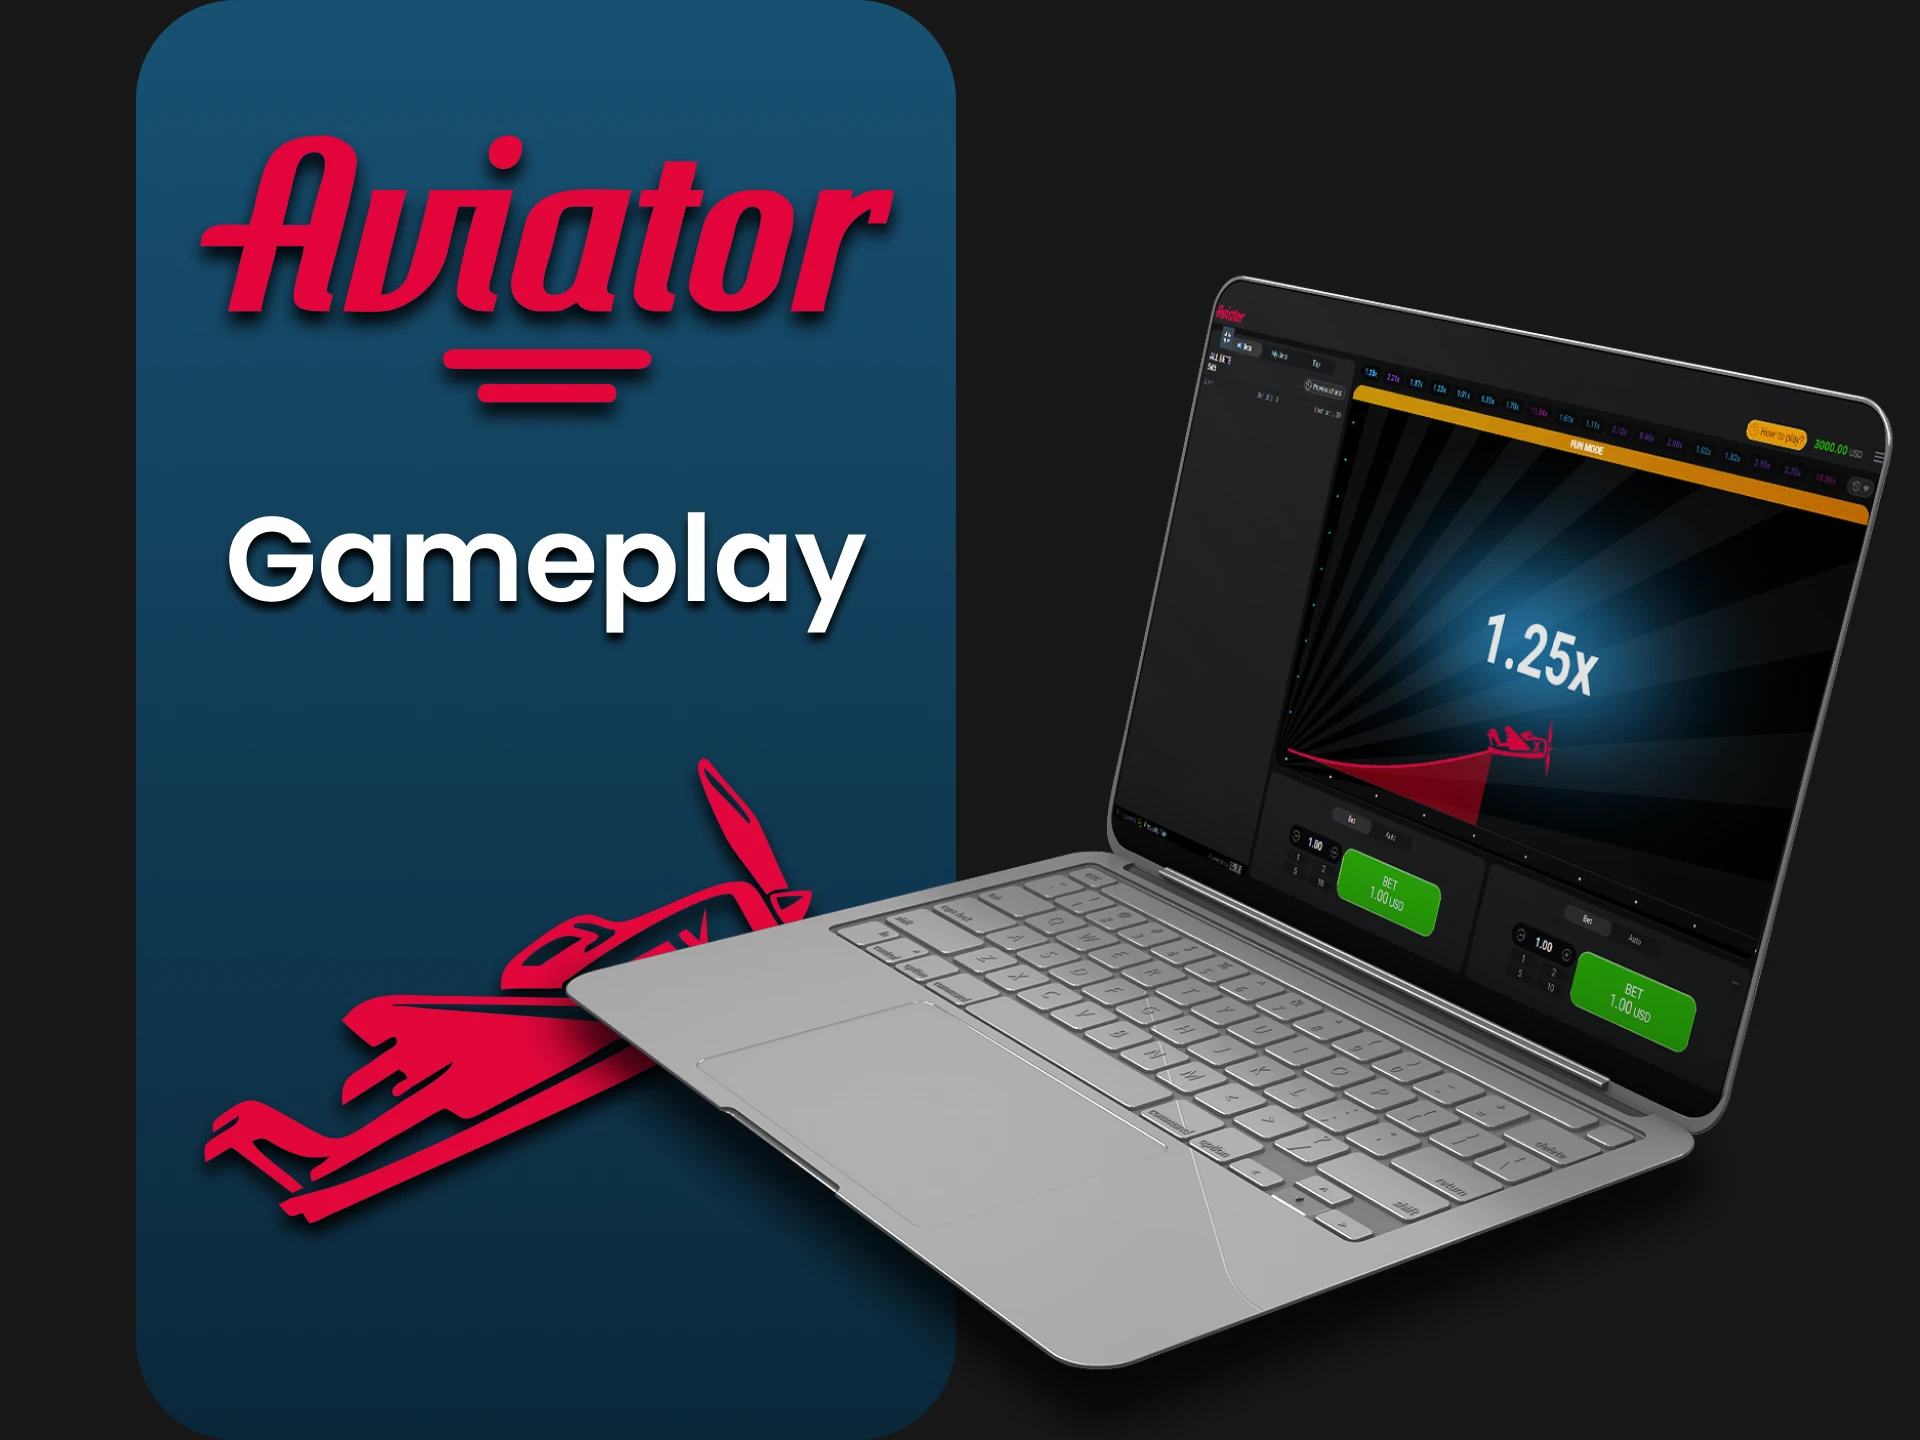 We will show you how the Aviator game works.